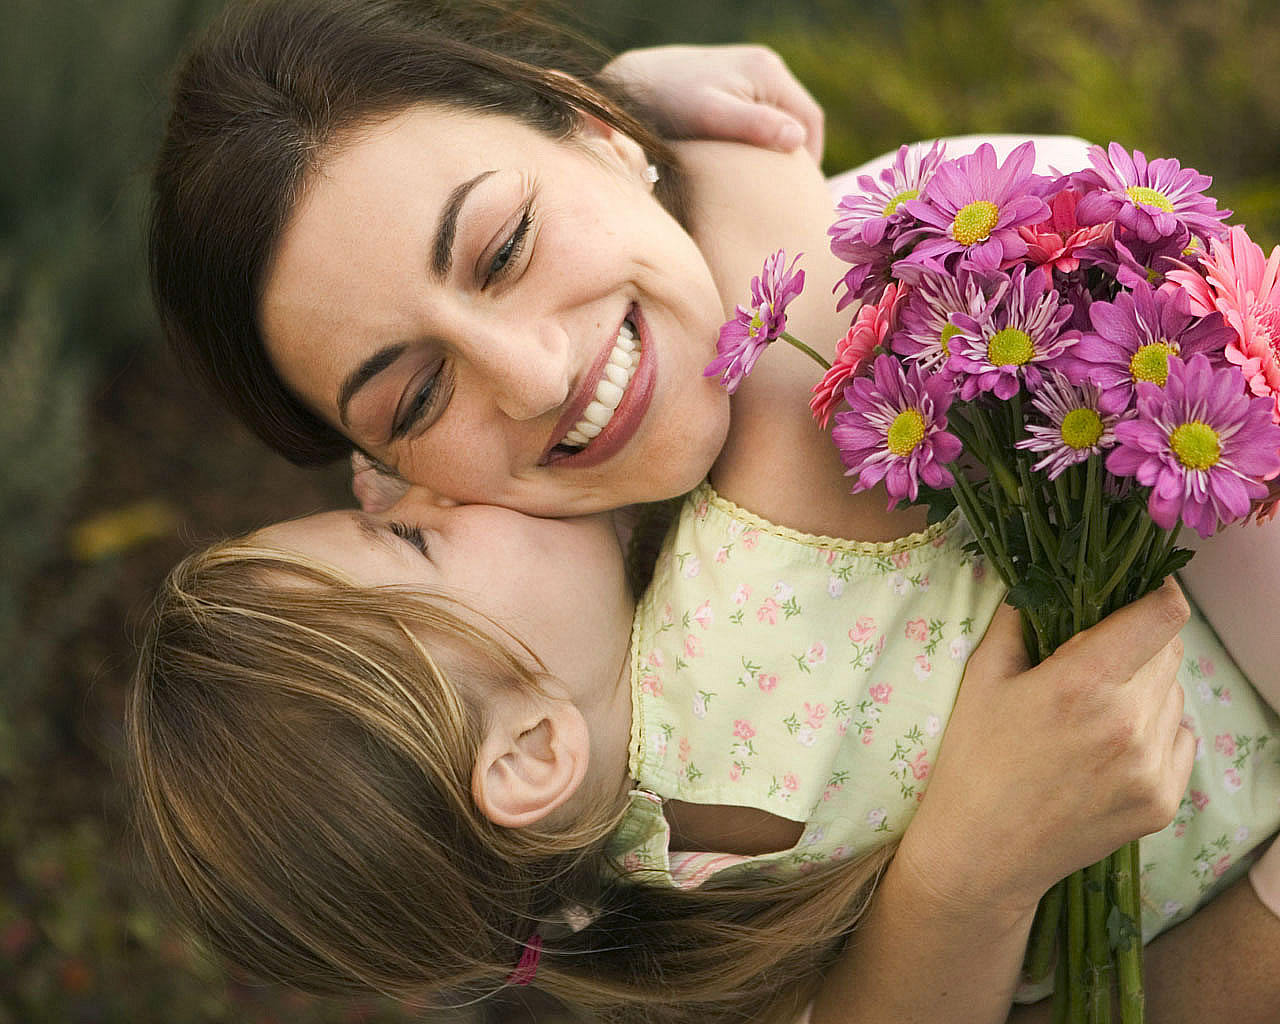 HD Wallpapers 2011 <b>Happy Mother&#39;s</b> Day - 2011-happy-mother-s-day_1280x1024_90918